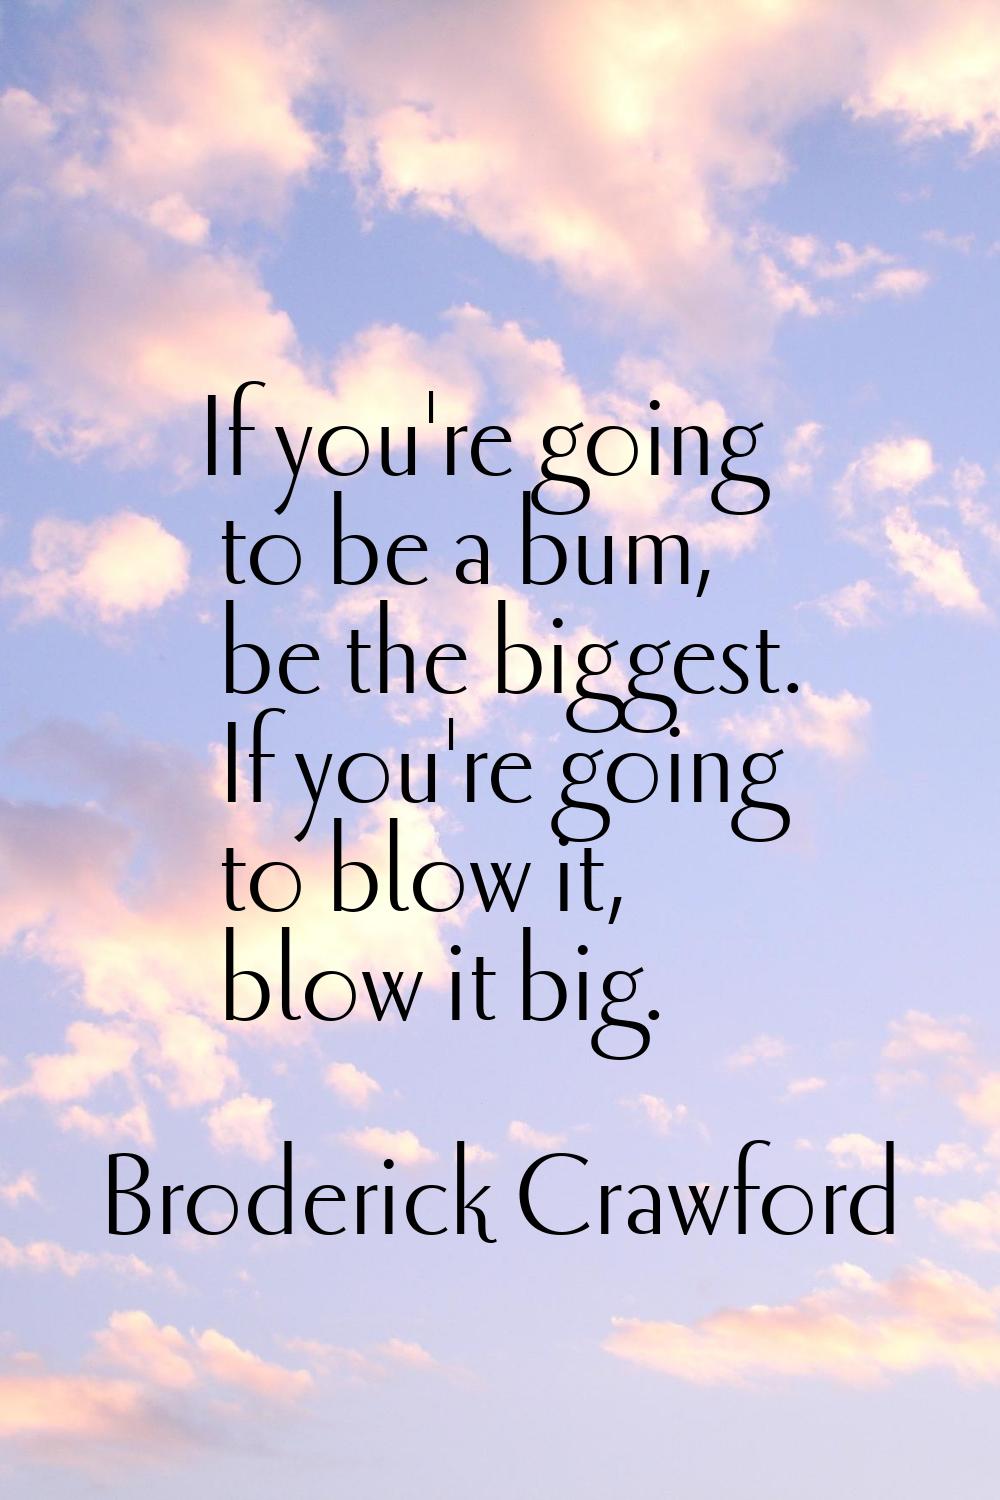 If you're going to be a bum, be the biggest. If you're going to blow it, blow it big.